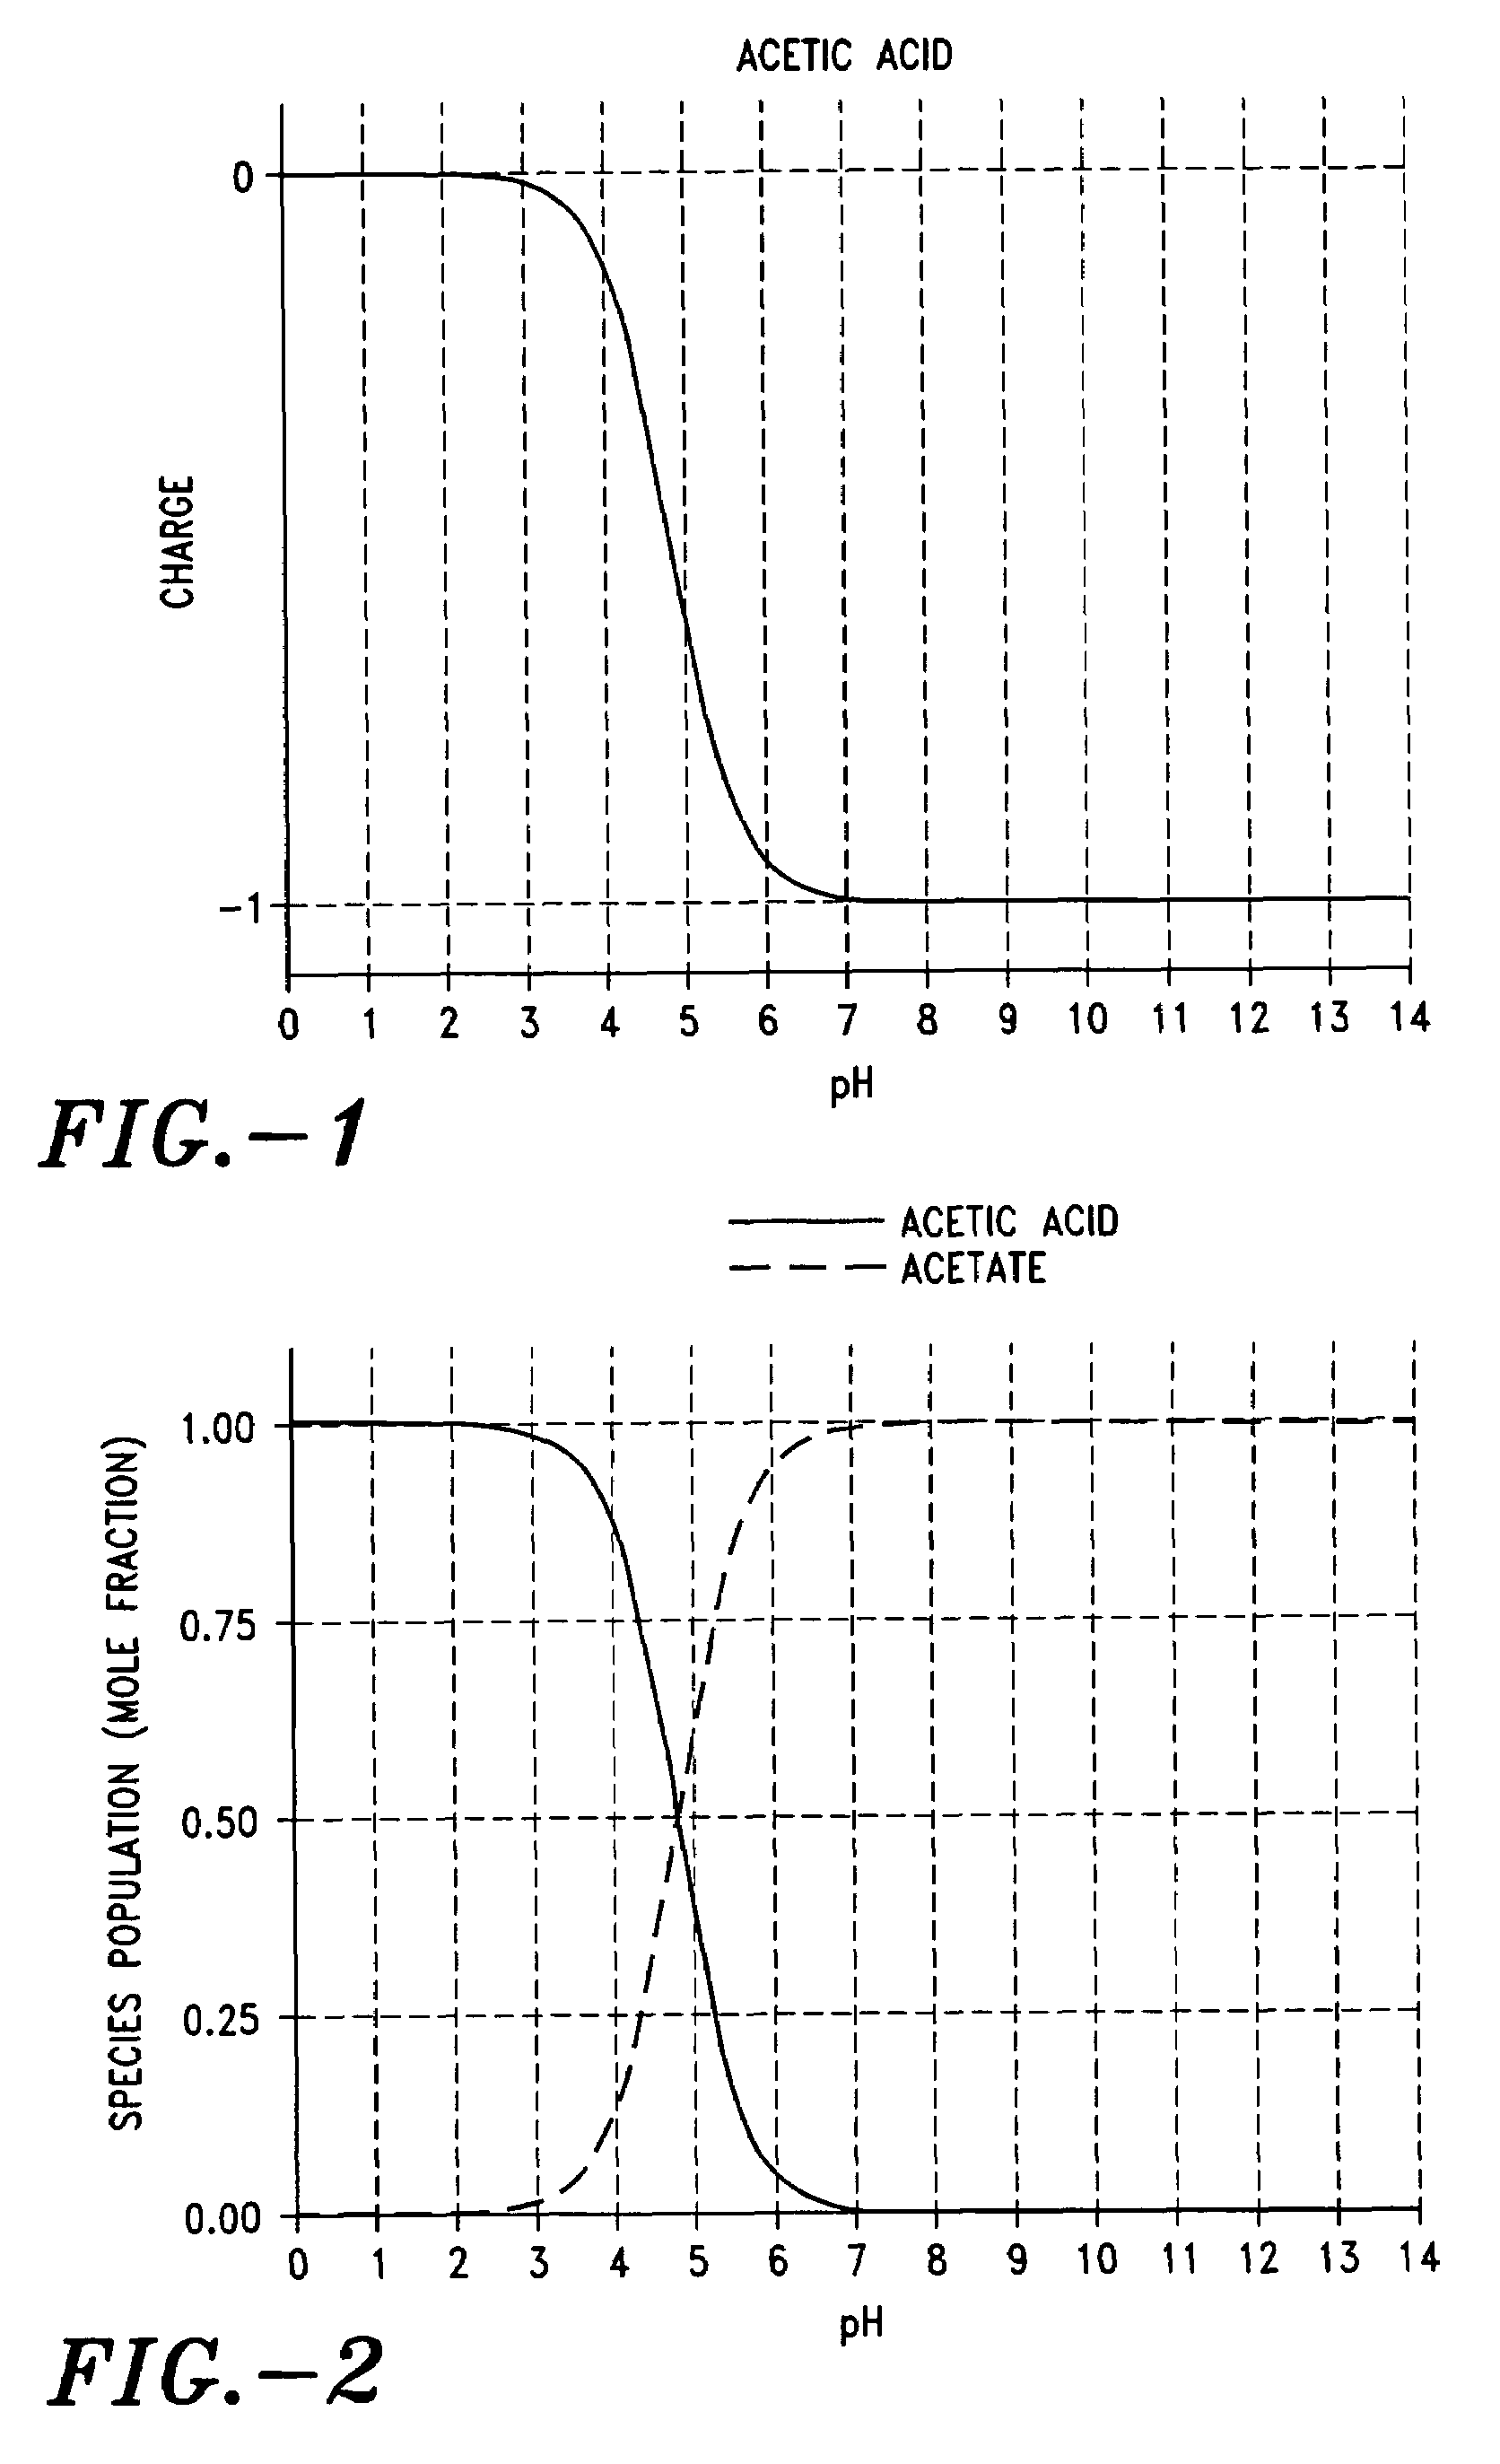 Formulations for coated microprojections containing non-volatile counterions